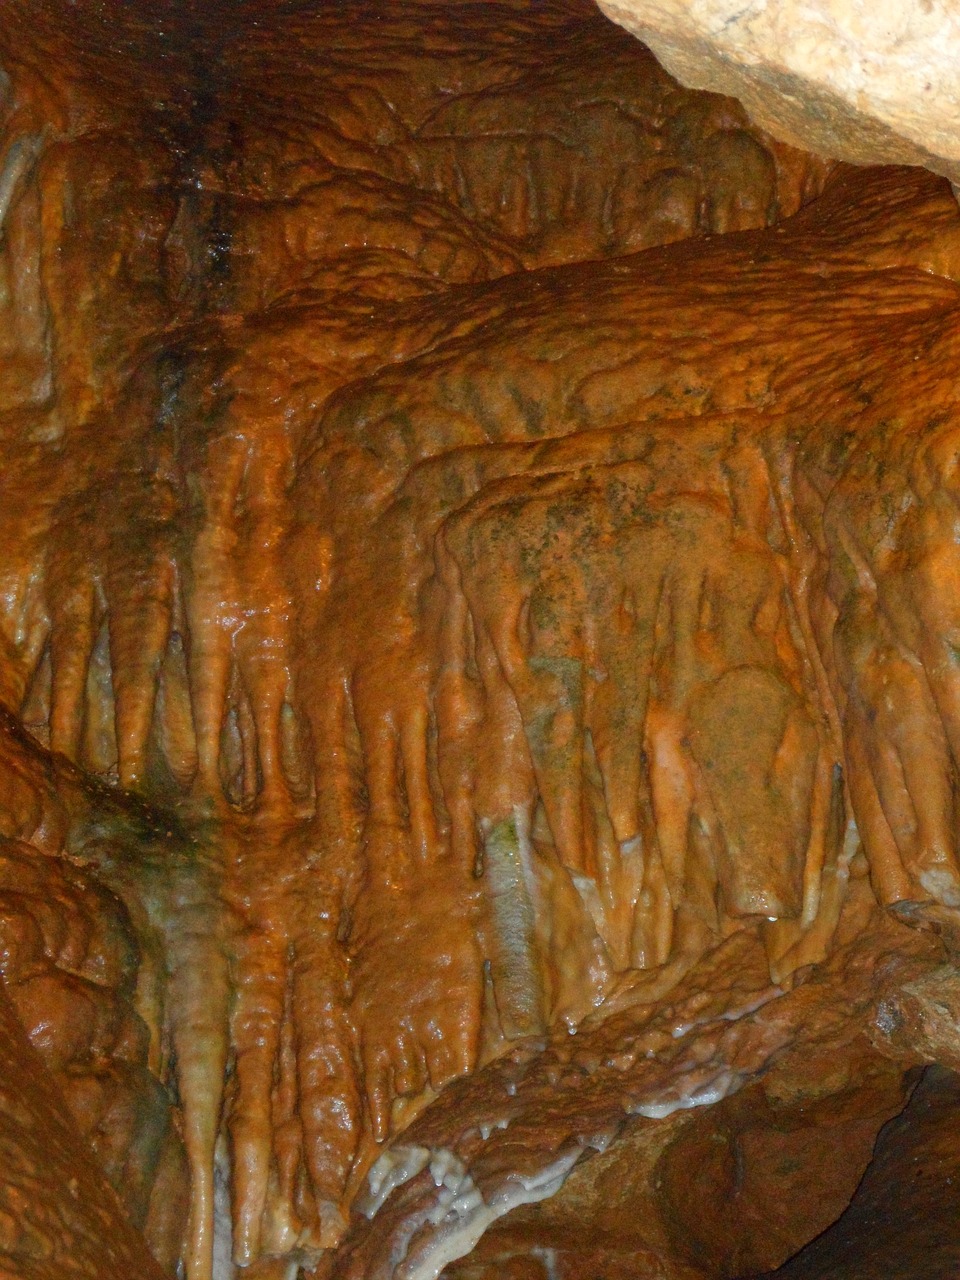 sand stone cave structure free photo